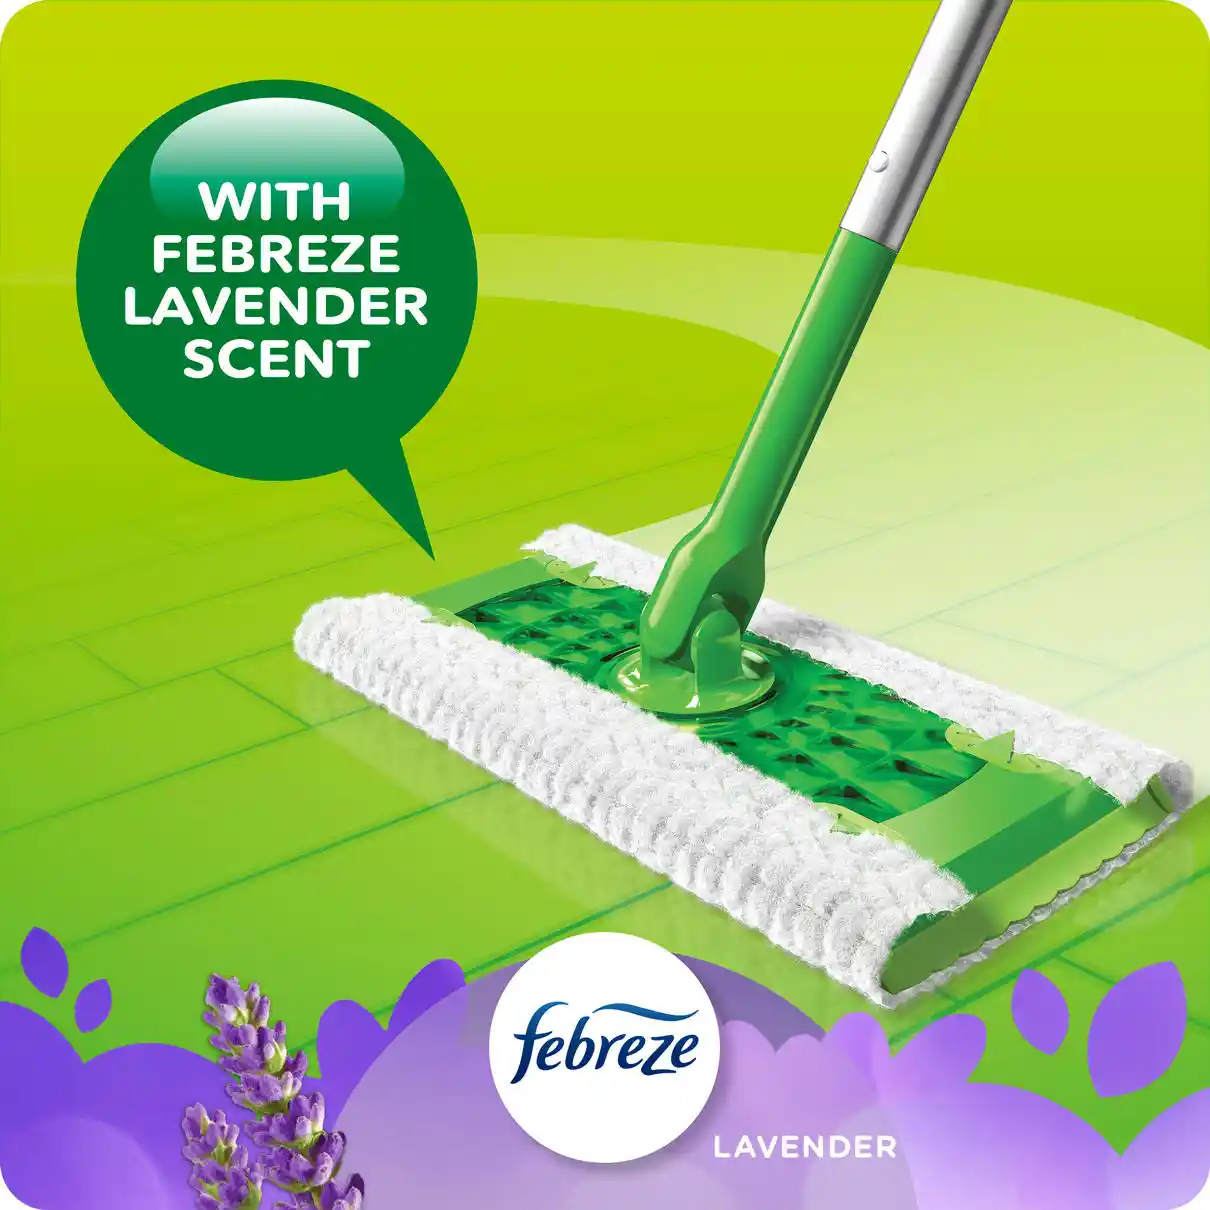 Swiffer Sweeper Dry Sweeping Cloths - Unscented - 52ct : Target